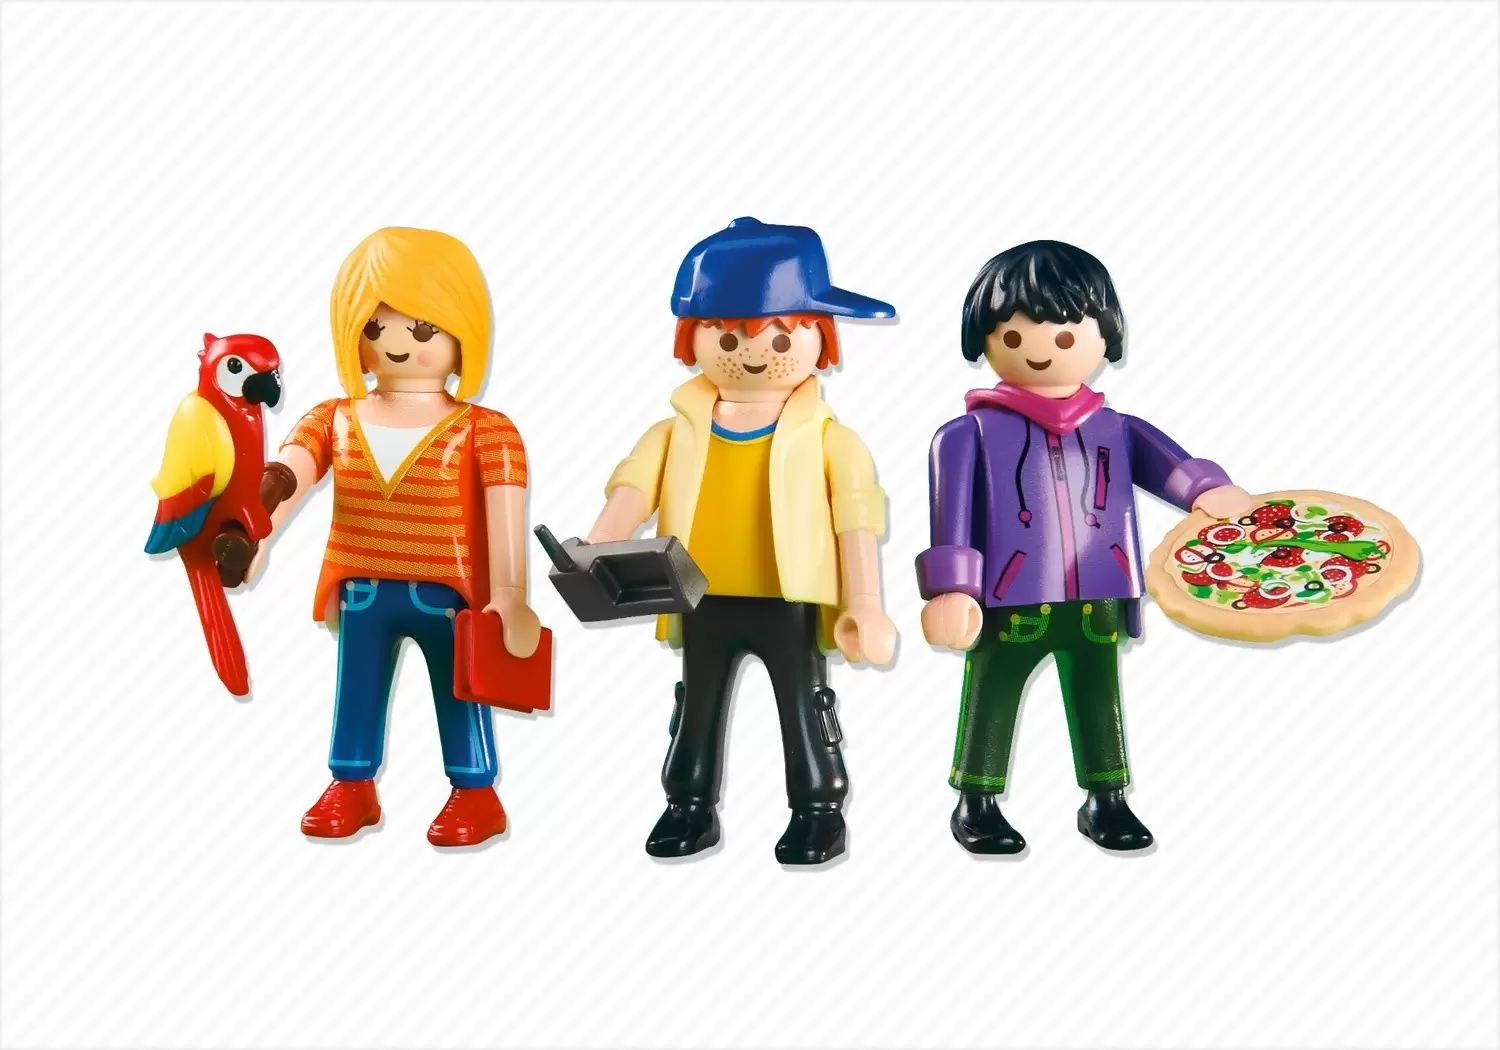 Playmobil in the City - The Three PLAYMOS